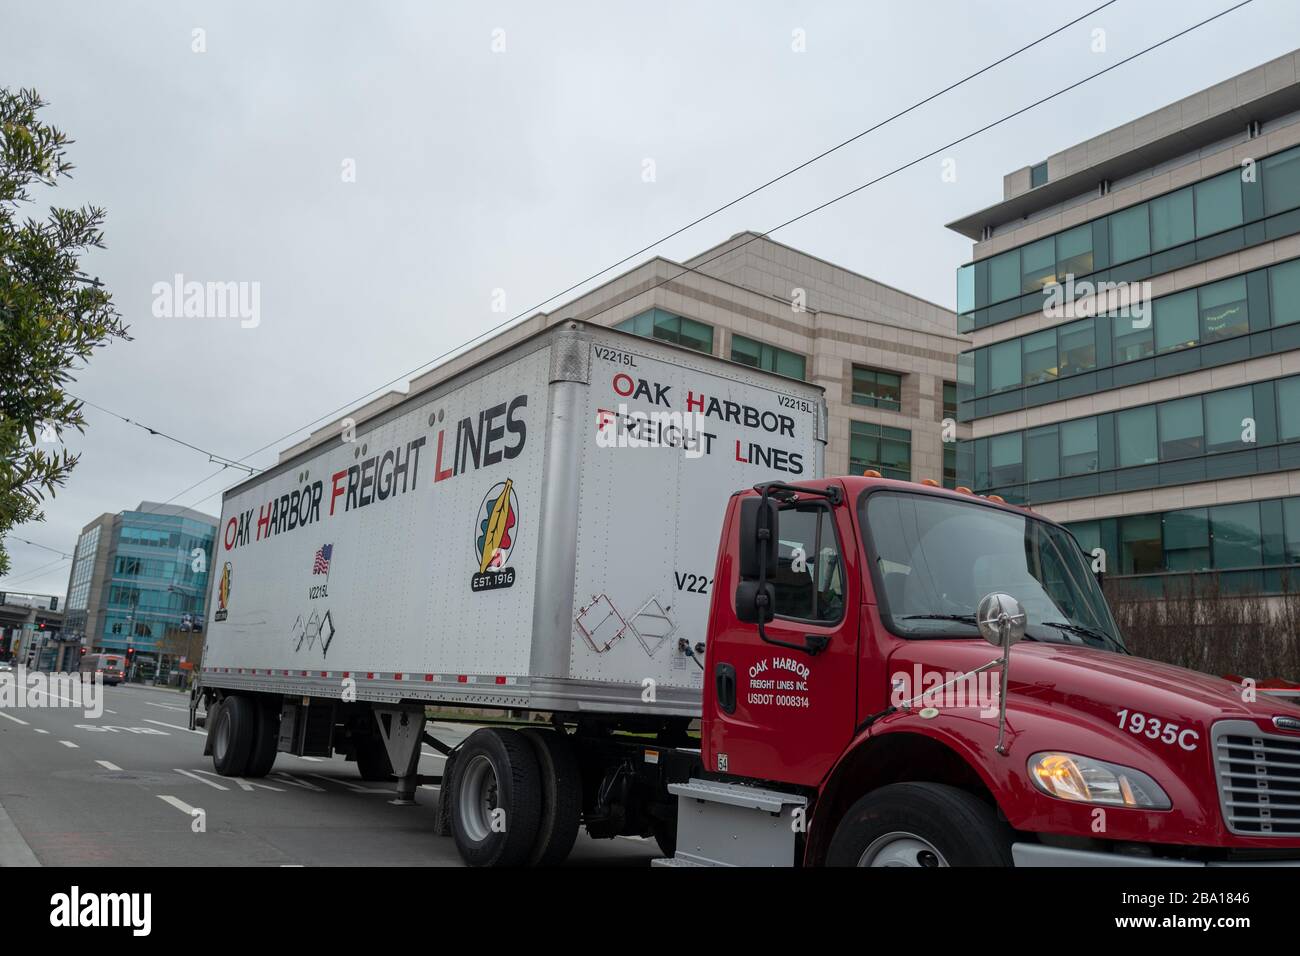 Oak Harbor Freight Lines delivery truck, deemed an essential service business, during an outbreak of the COVID-19 coronavirus in San Francisco, California, March 23, 2020. () Stock Photo